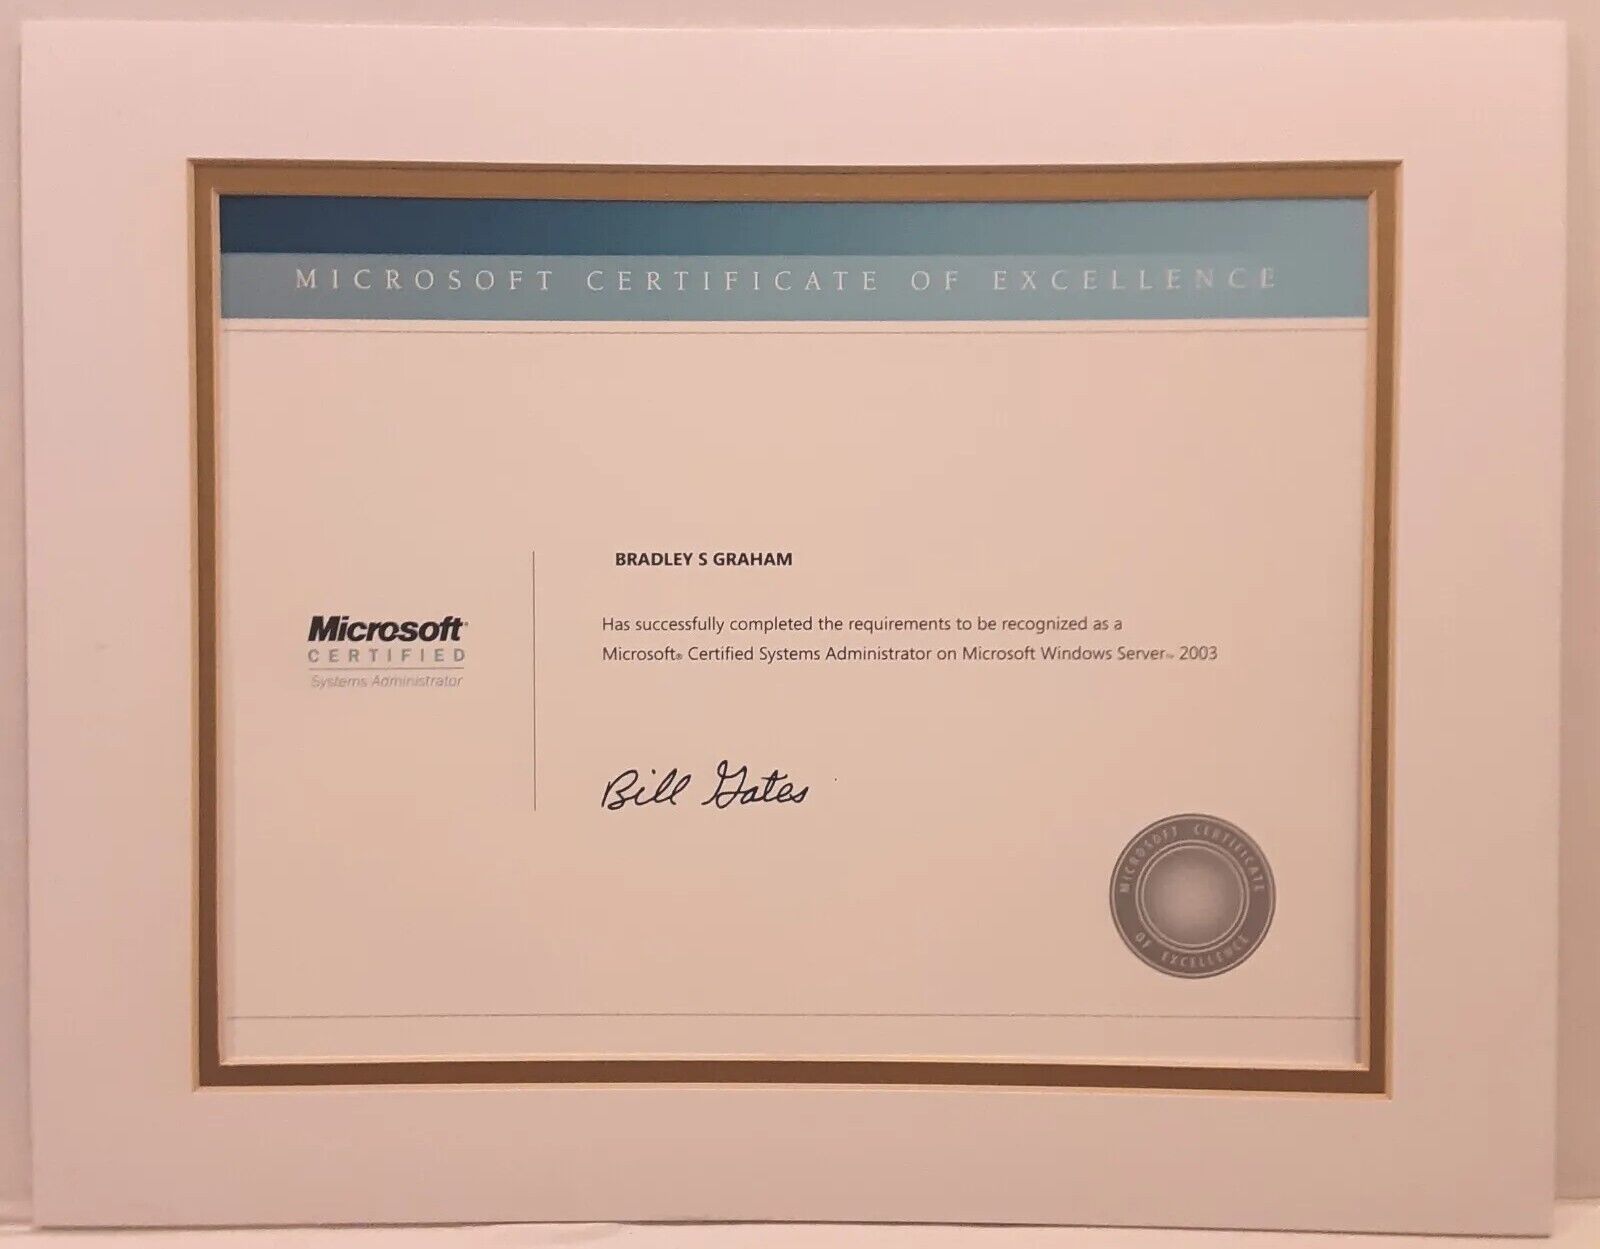 Microsoft Certified Systems Administrator certificate embossed seal